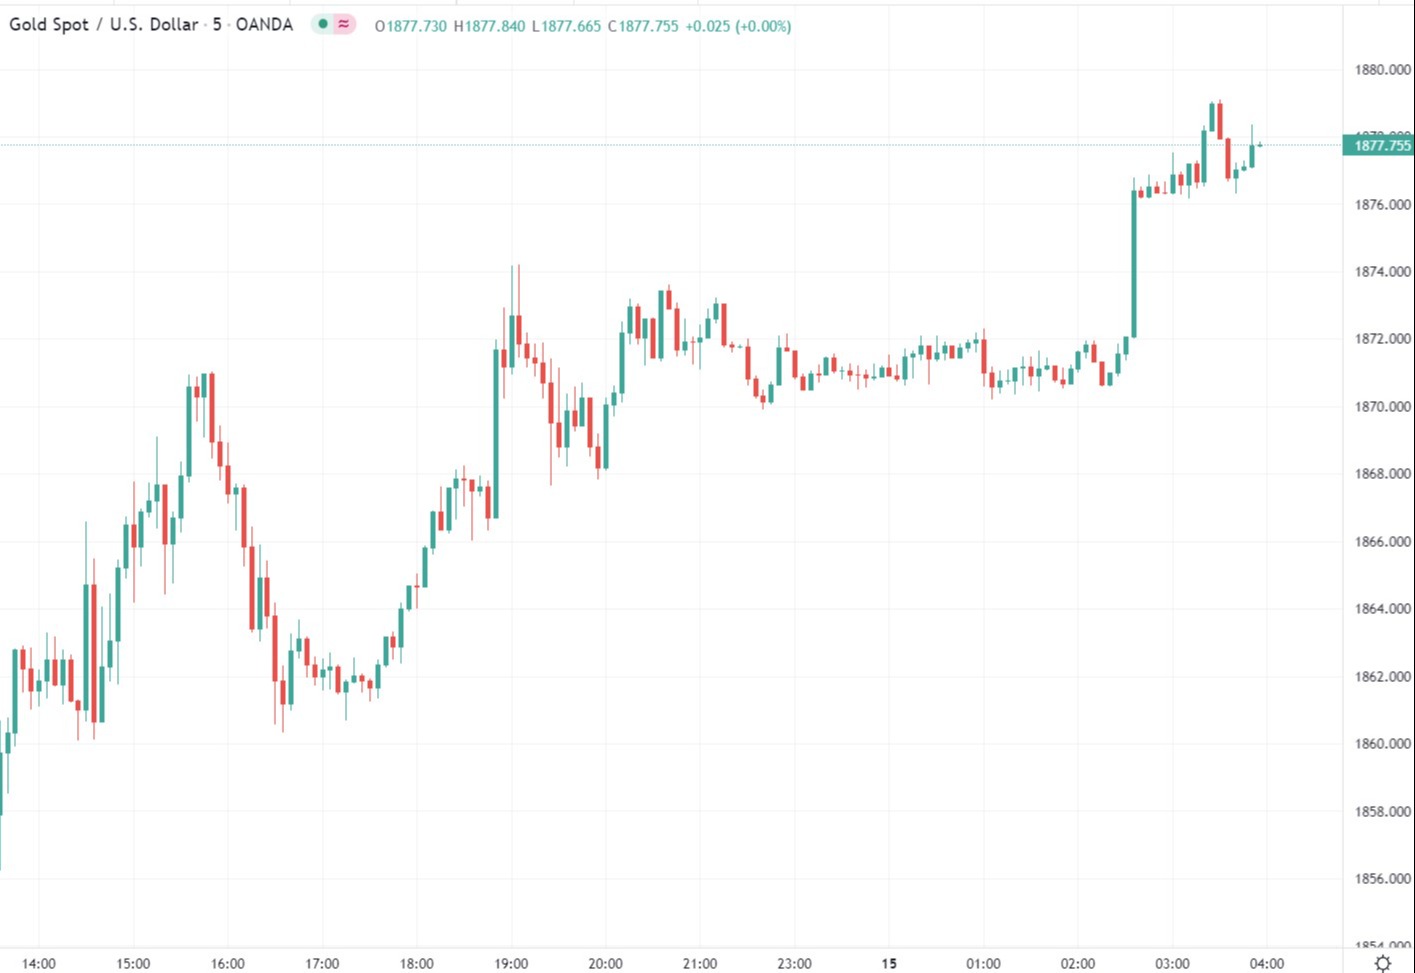 ForexLive Asia FX news wrap: RBA and PBoC activity today